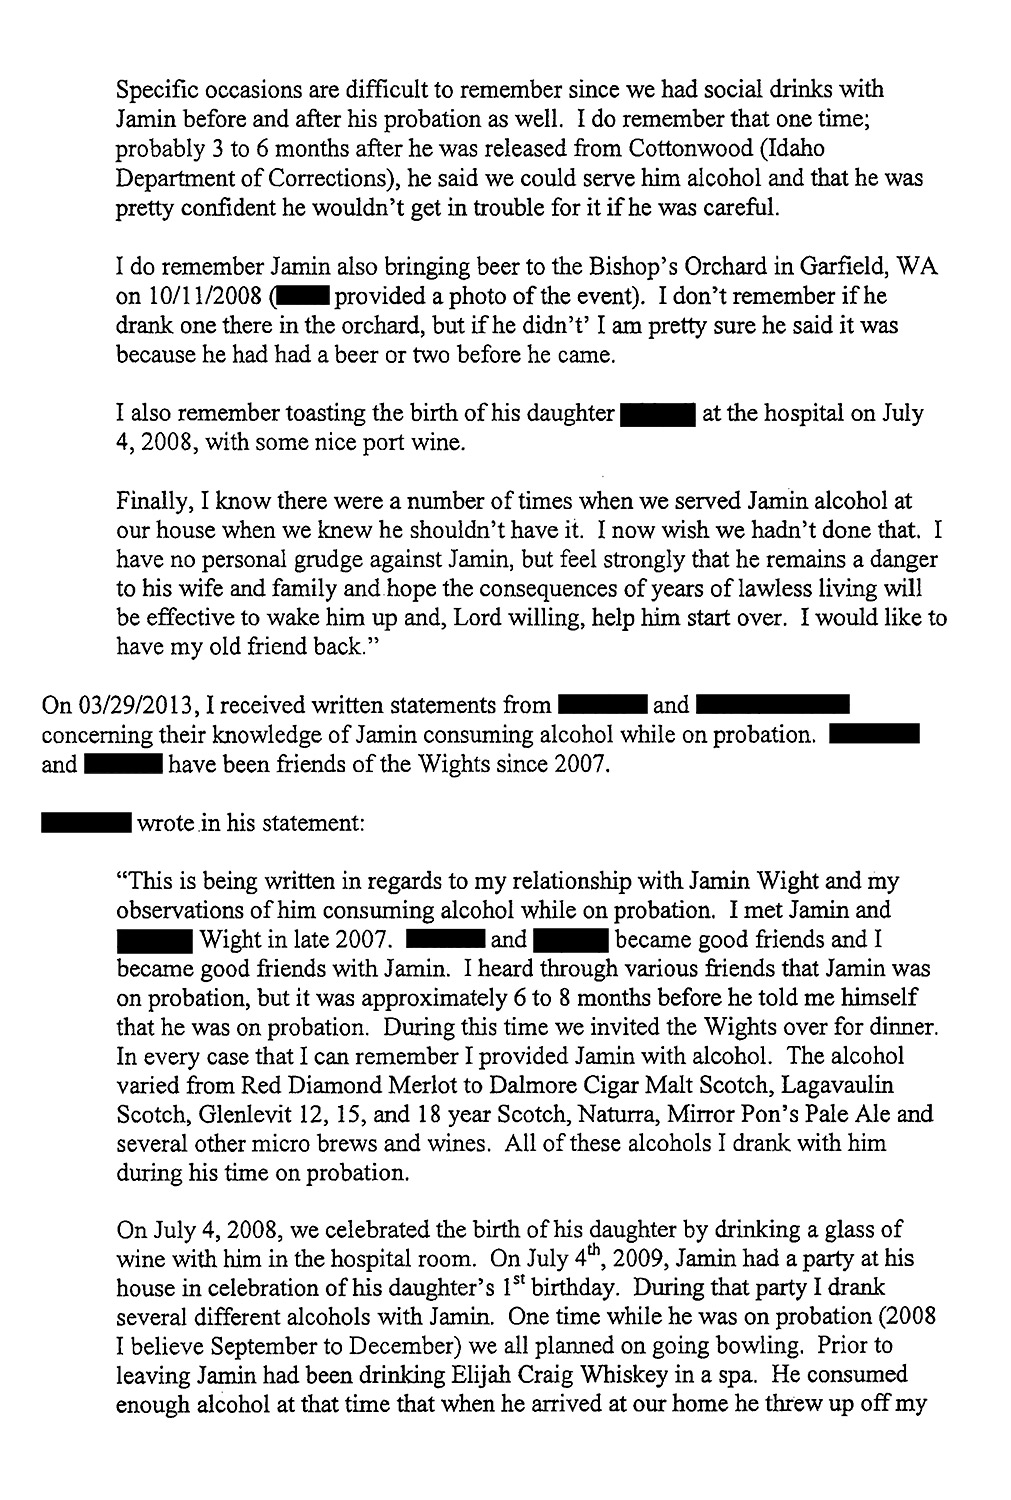 Affidavit of Latah County Sheriff’s Detective Justin Anderson page 4